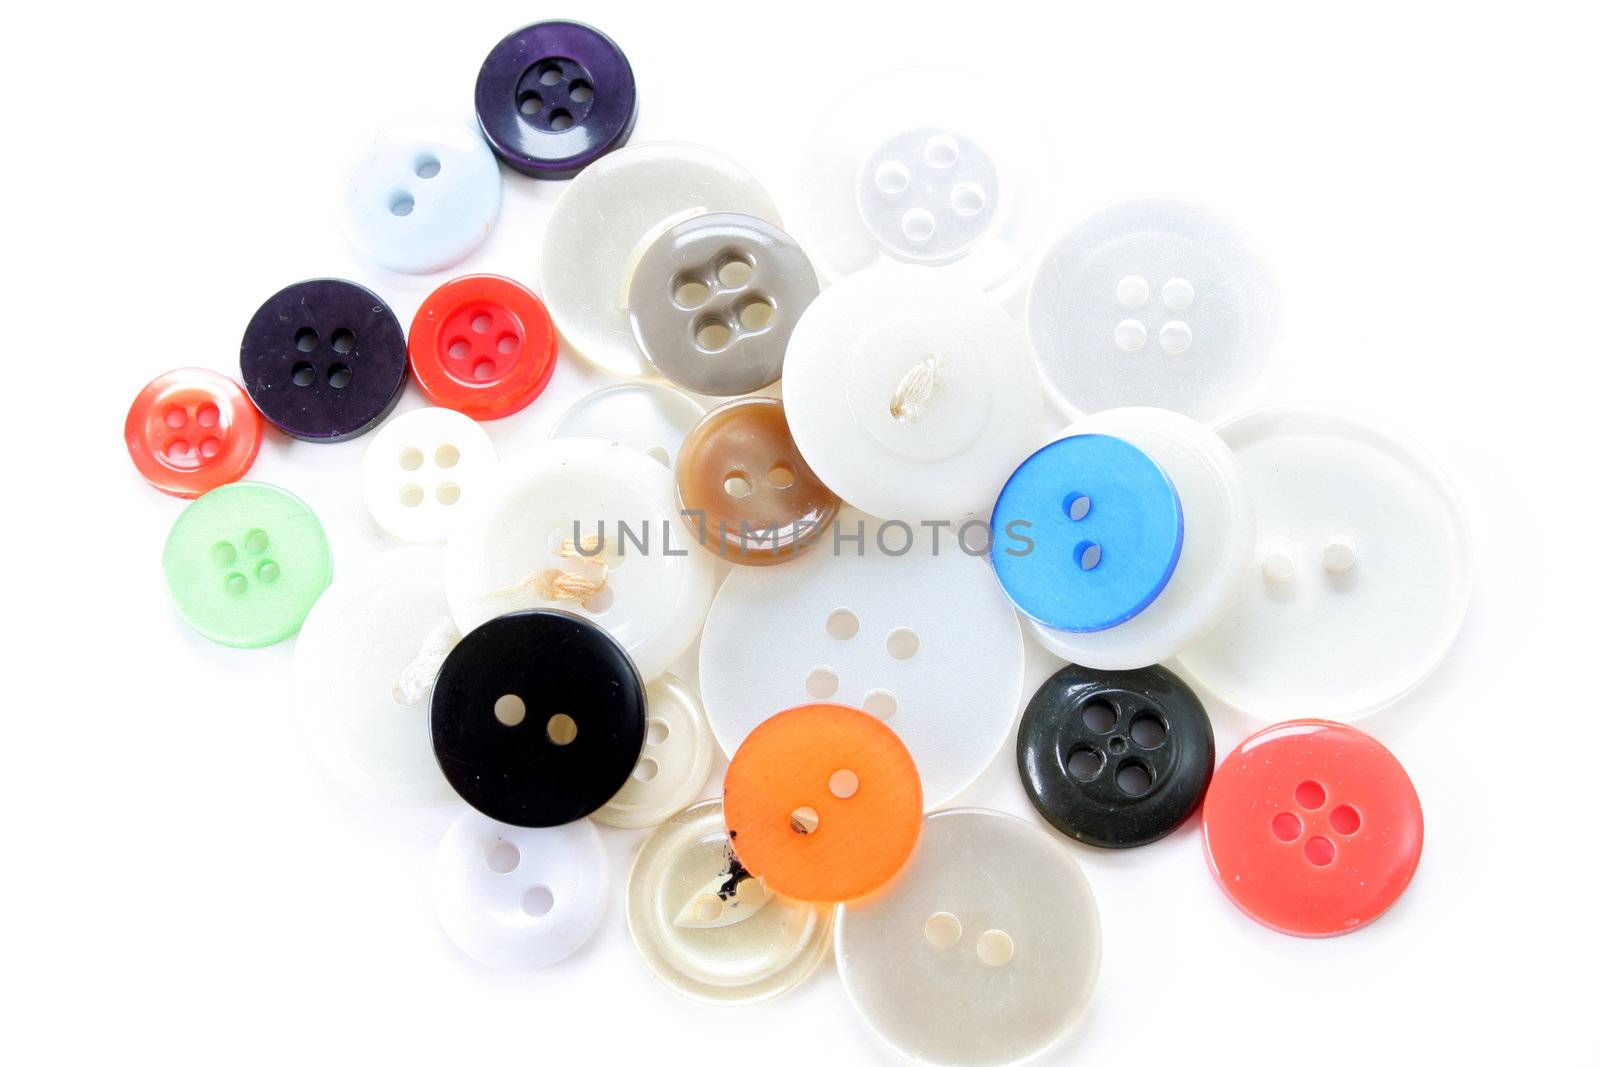 Buttons by thephotoguy